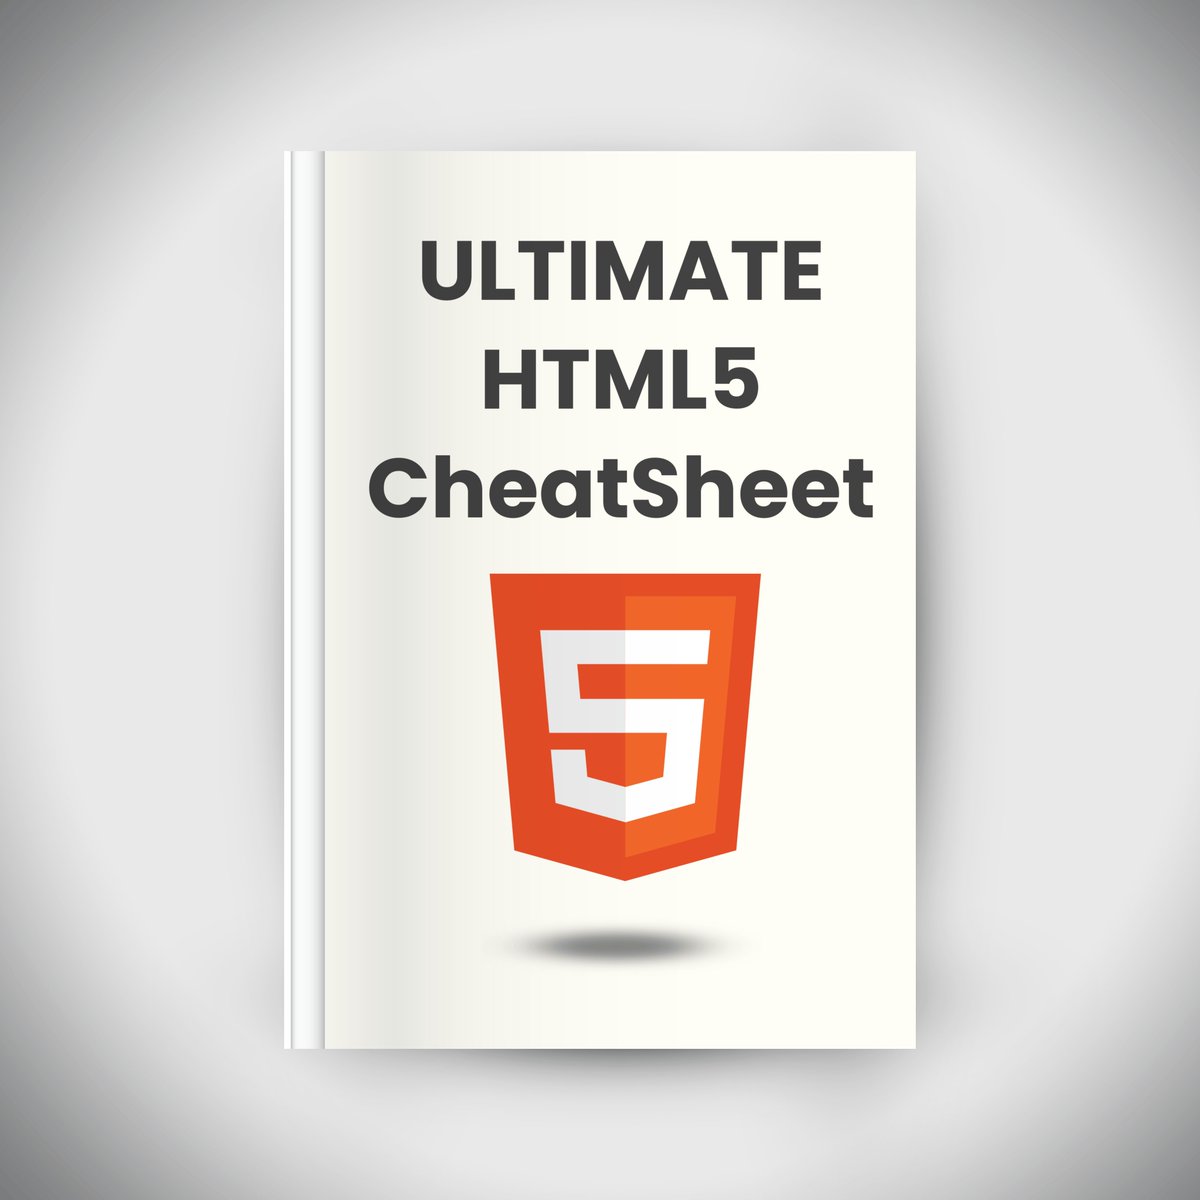 HTML is a popular language.

But not easy to learn.

So I have prepared the ' Ultimate HTML5 cheat sheet' ebook

100% FREE for the next 24hrs!

Just:
1. Like
2. Reply 'HTML'
3. Follow @alifcoder ( so I can DM you)